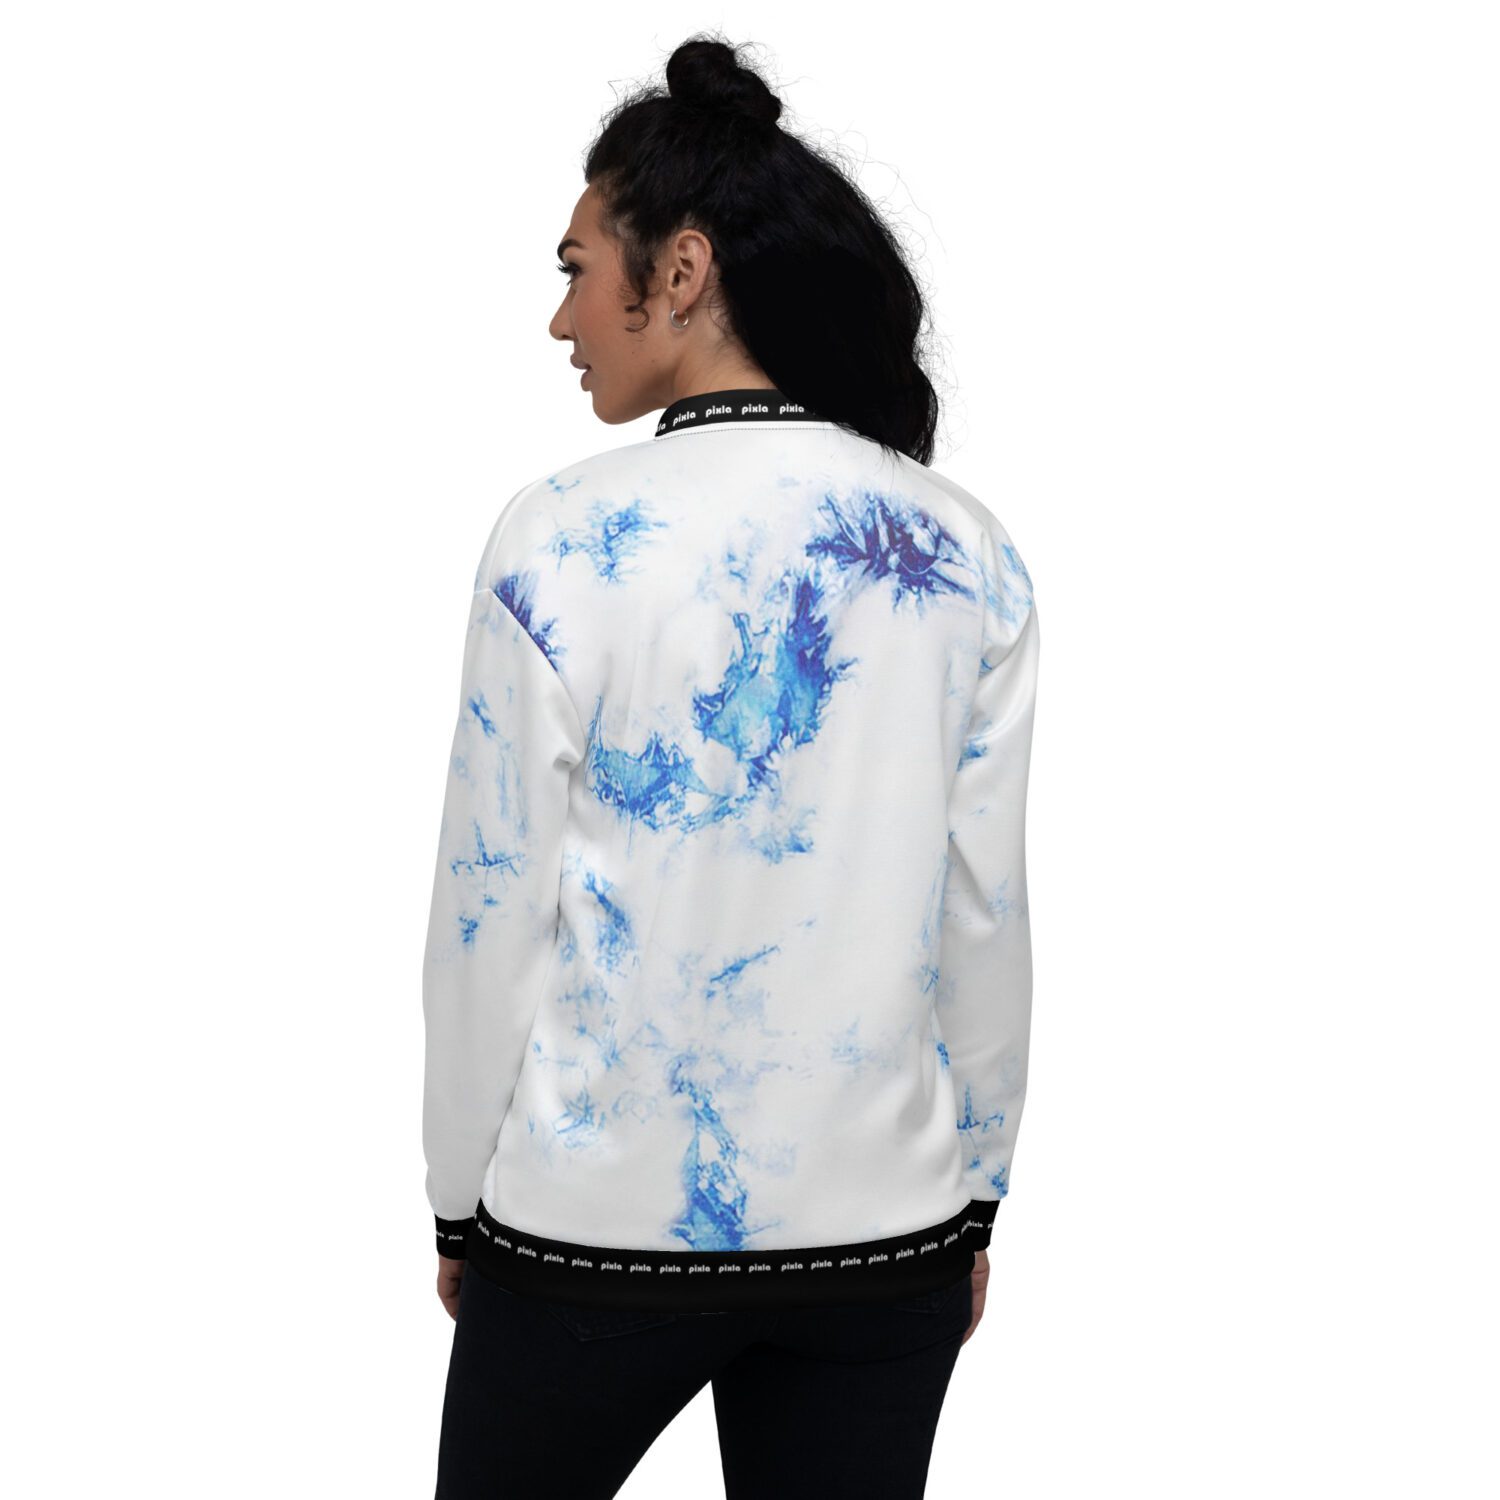 Sheen satin feel lightweight unisex bomber jacket with brushed fleece inside and vibrant royal blue tie-dye print. Zipper and two pockets. Sublimation print all over.